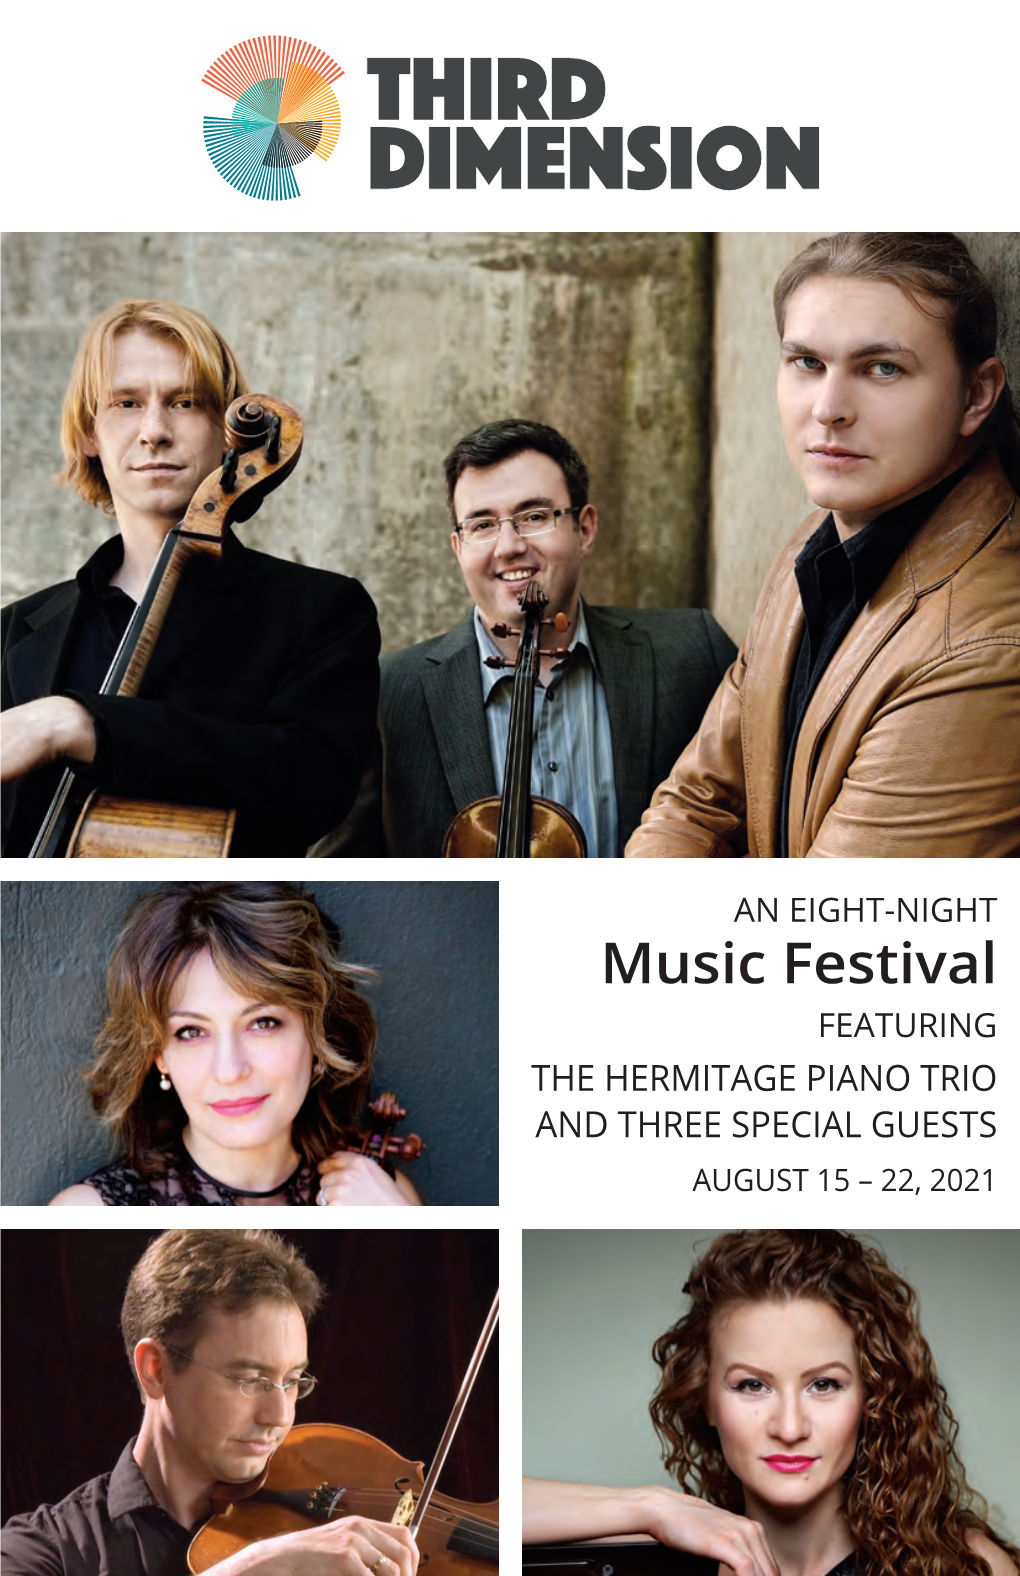 Music Festival FEATURING the HERMITAGE PIANO TRIO and THREE SPECIAL GUESTS AUGUST 15 – 22, 2021 THIRD DIMENSION